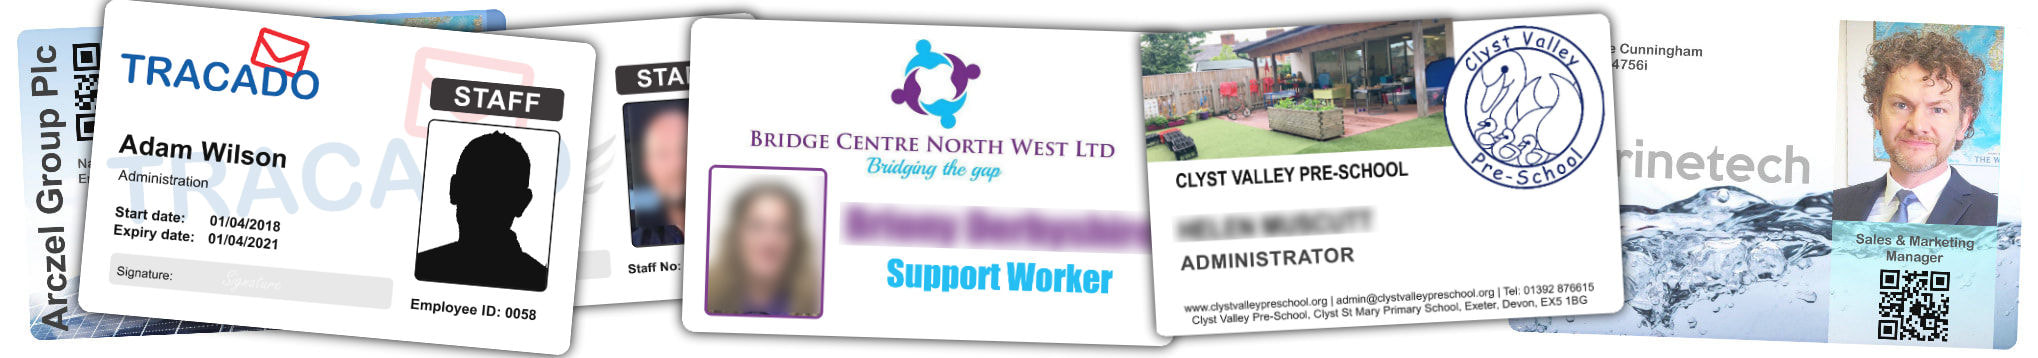 Bedford examples of staff photo ID cards | samples of employee Identity card printing | Workers ID cards printed in bedfordshire